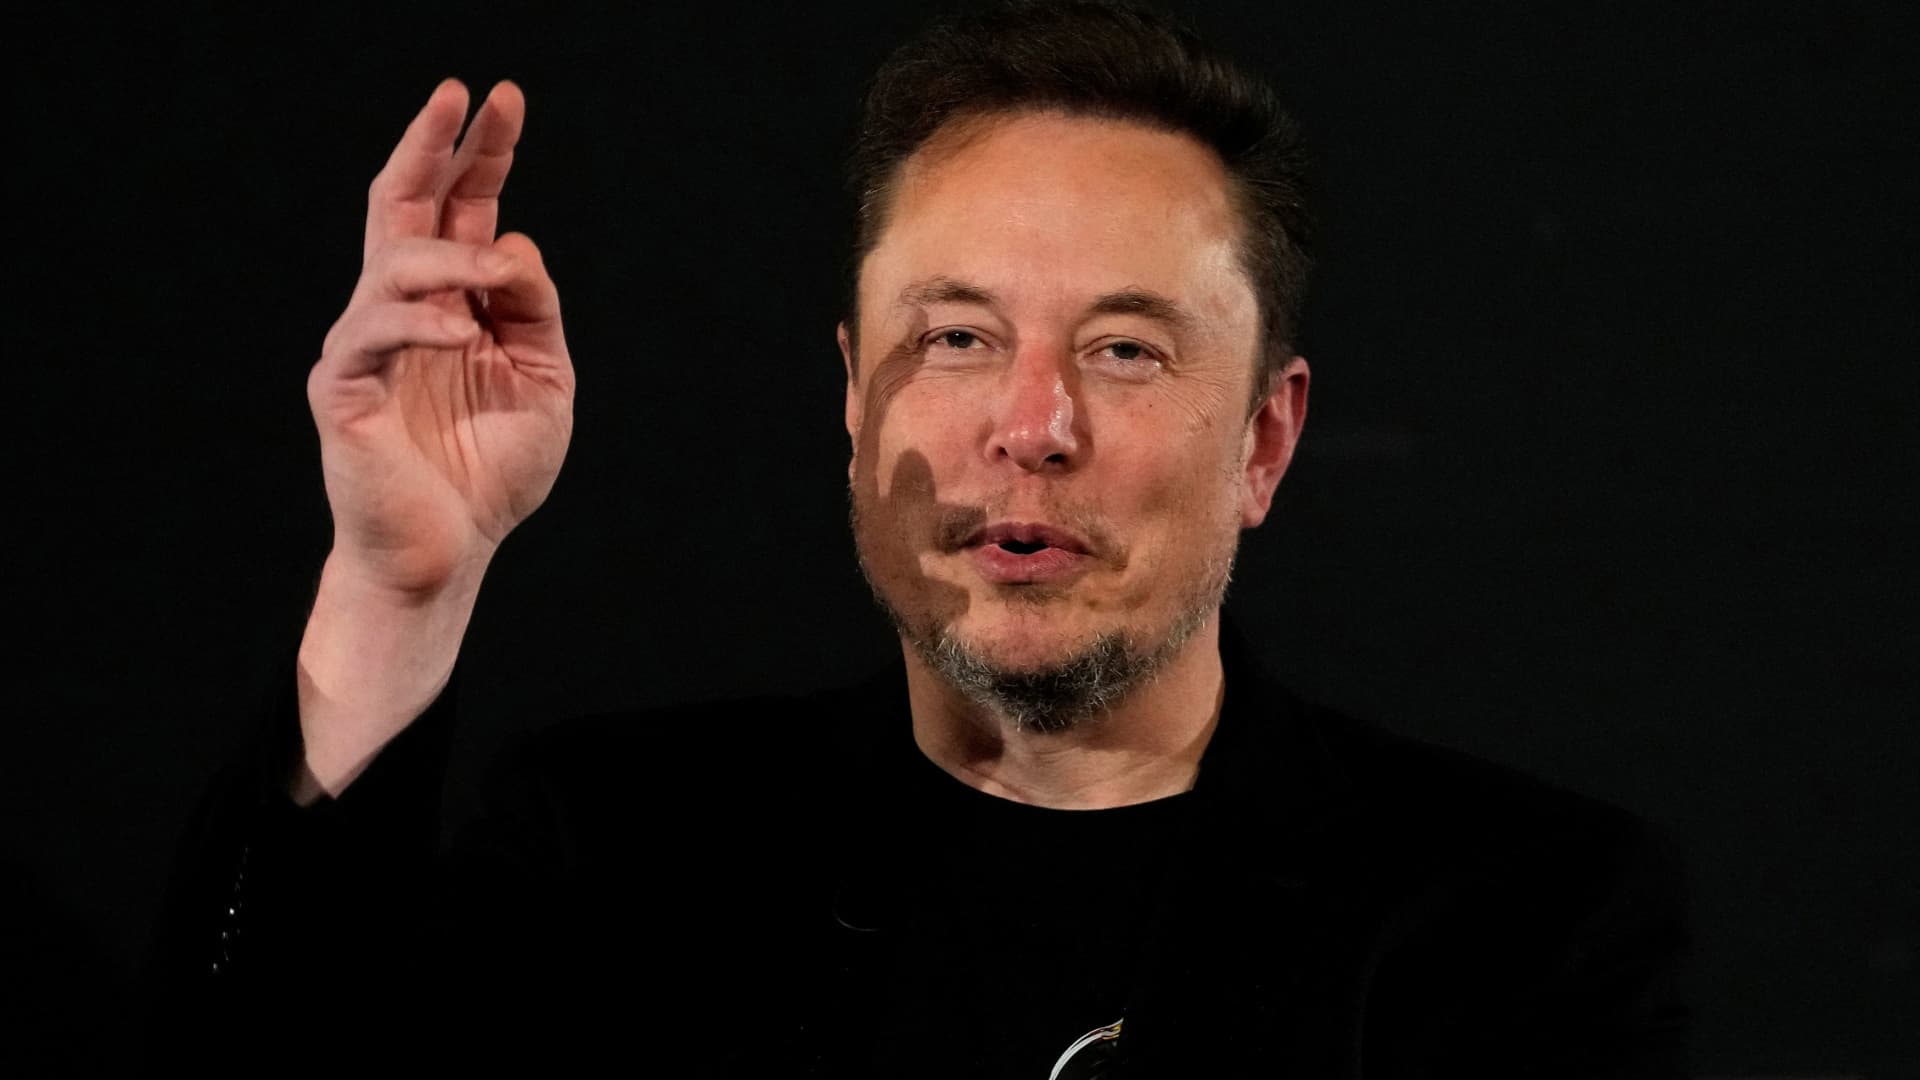 White House slams Musk antisemitic post, but says 'foolish' to drop SpaceX contracts